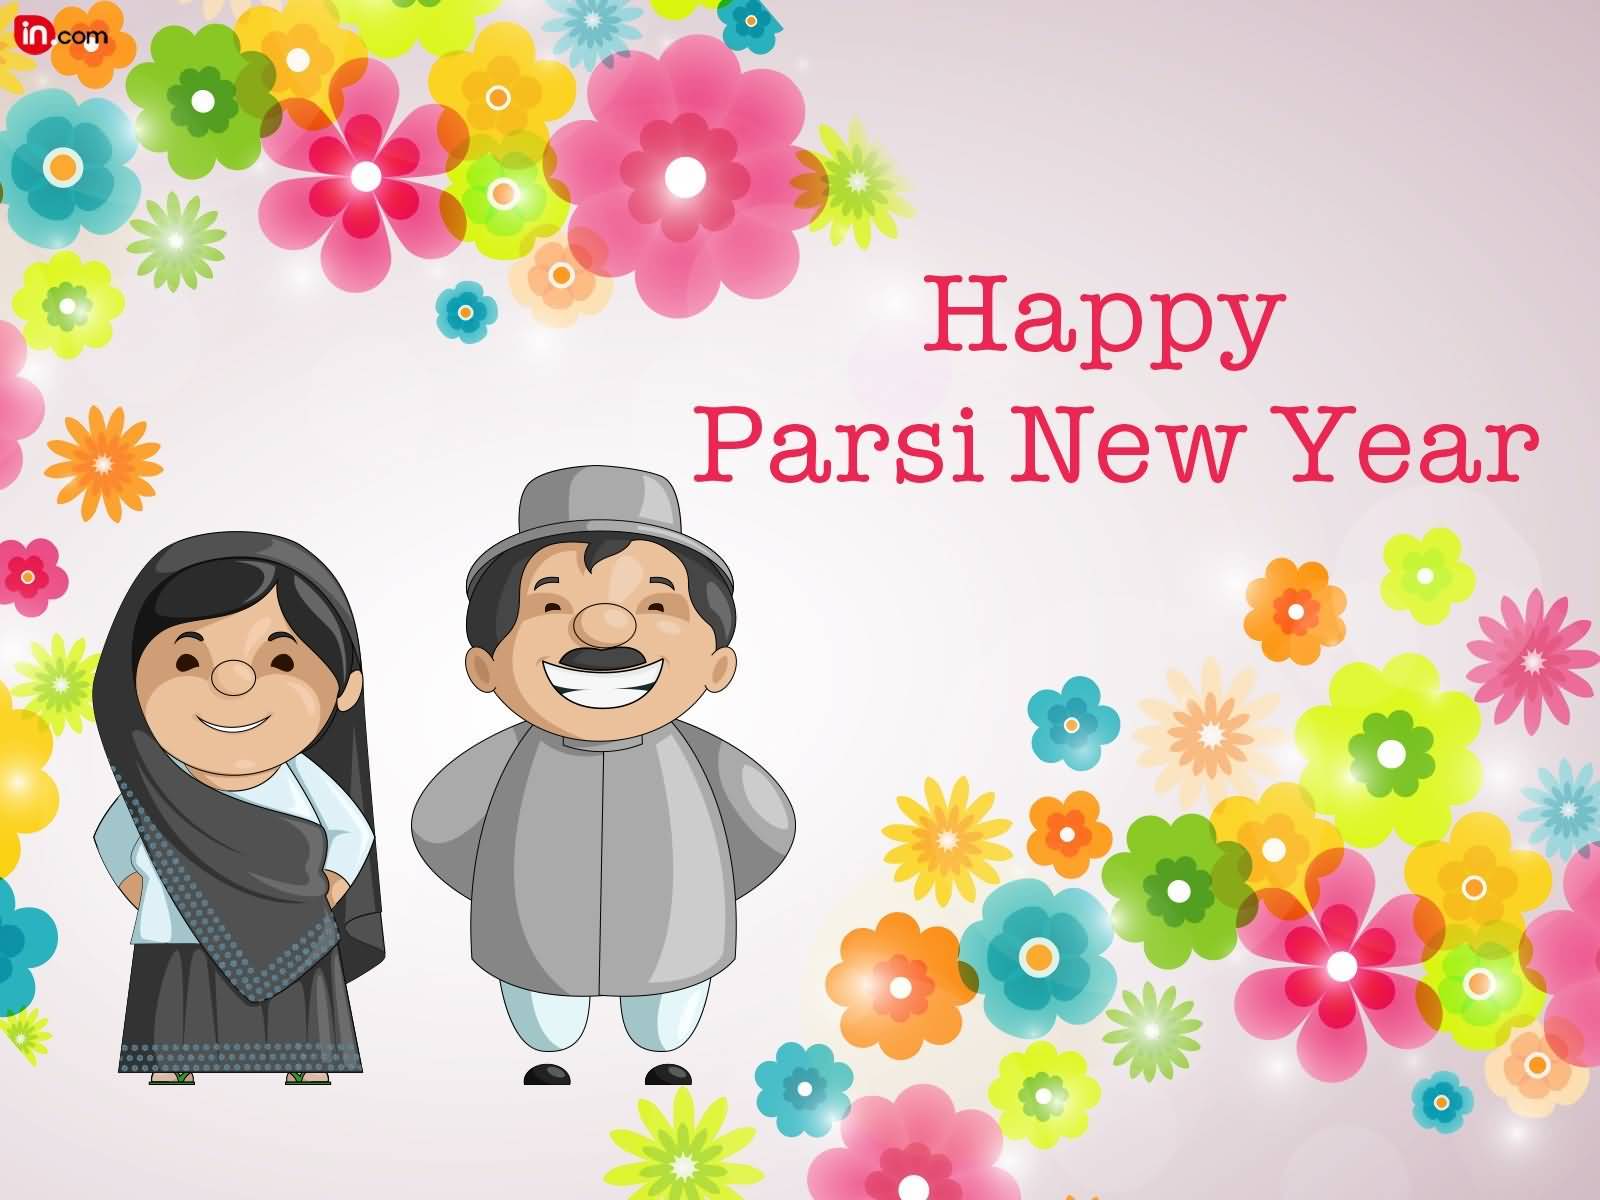 Parsi Couple Wishing You Happy Parsi New Year Colorful Flowers In Background